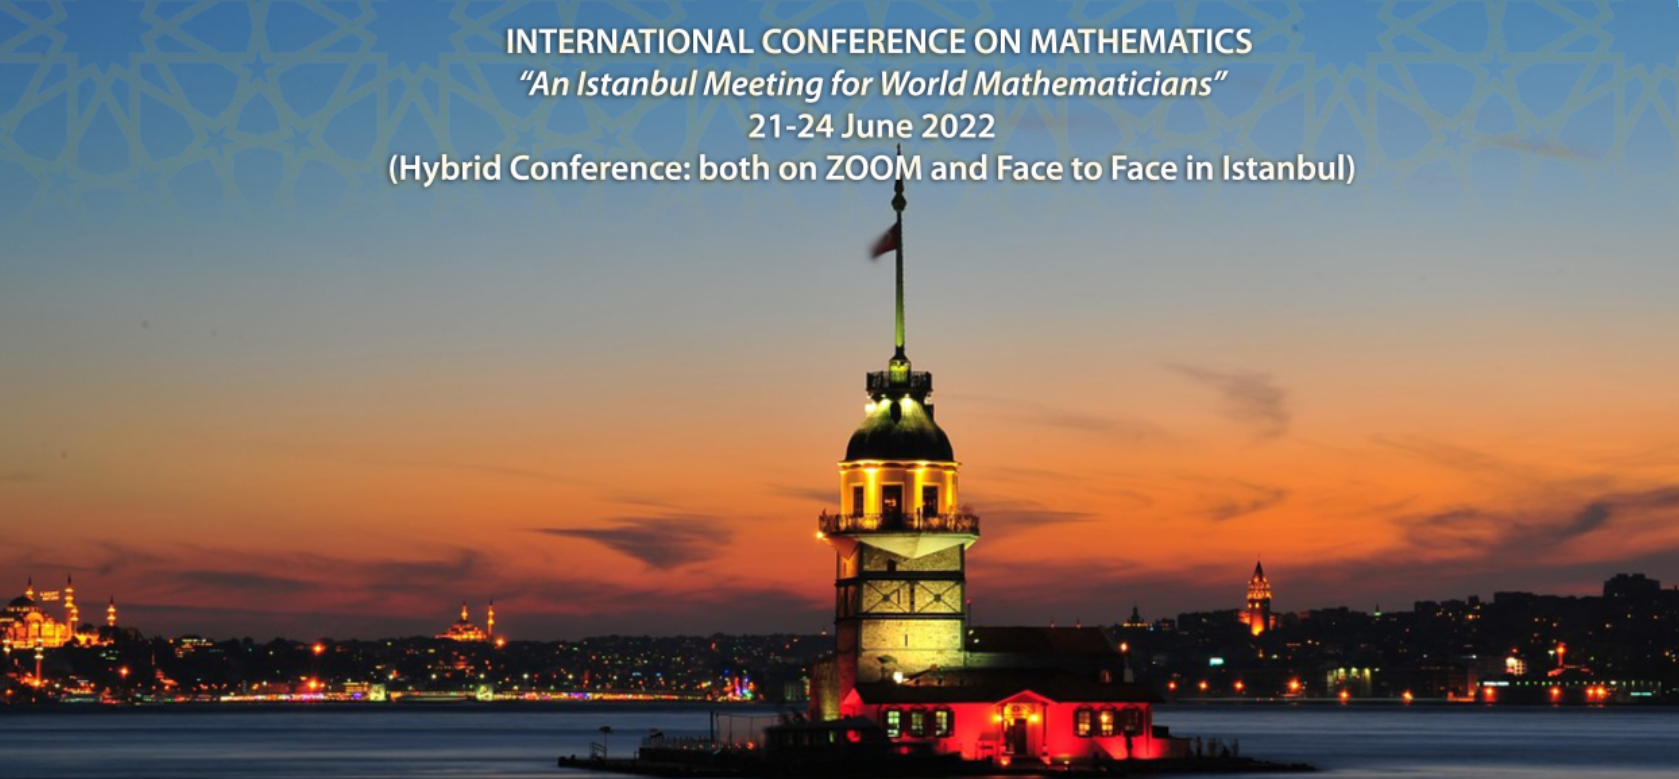 6. International Conference on Mathematics-An Istanbul Meeting for World Mathematicians